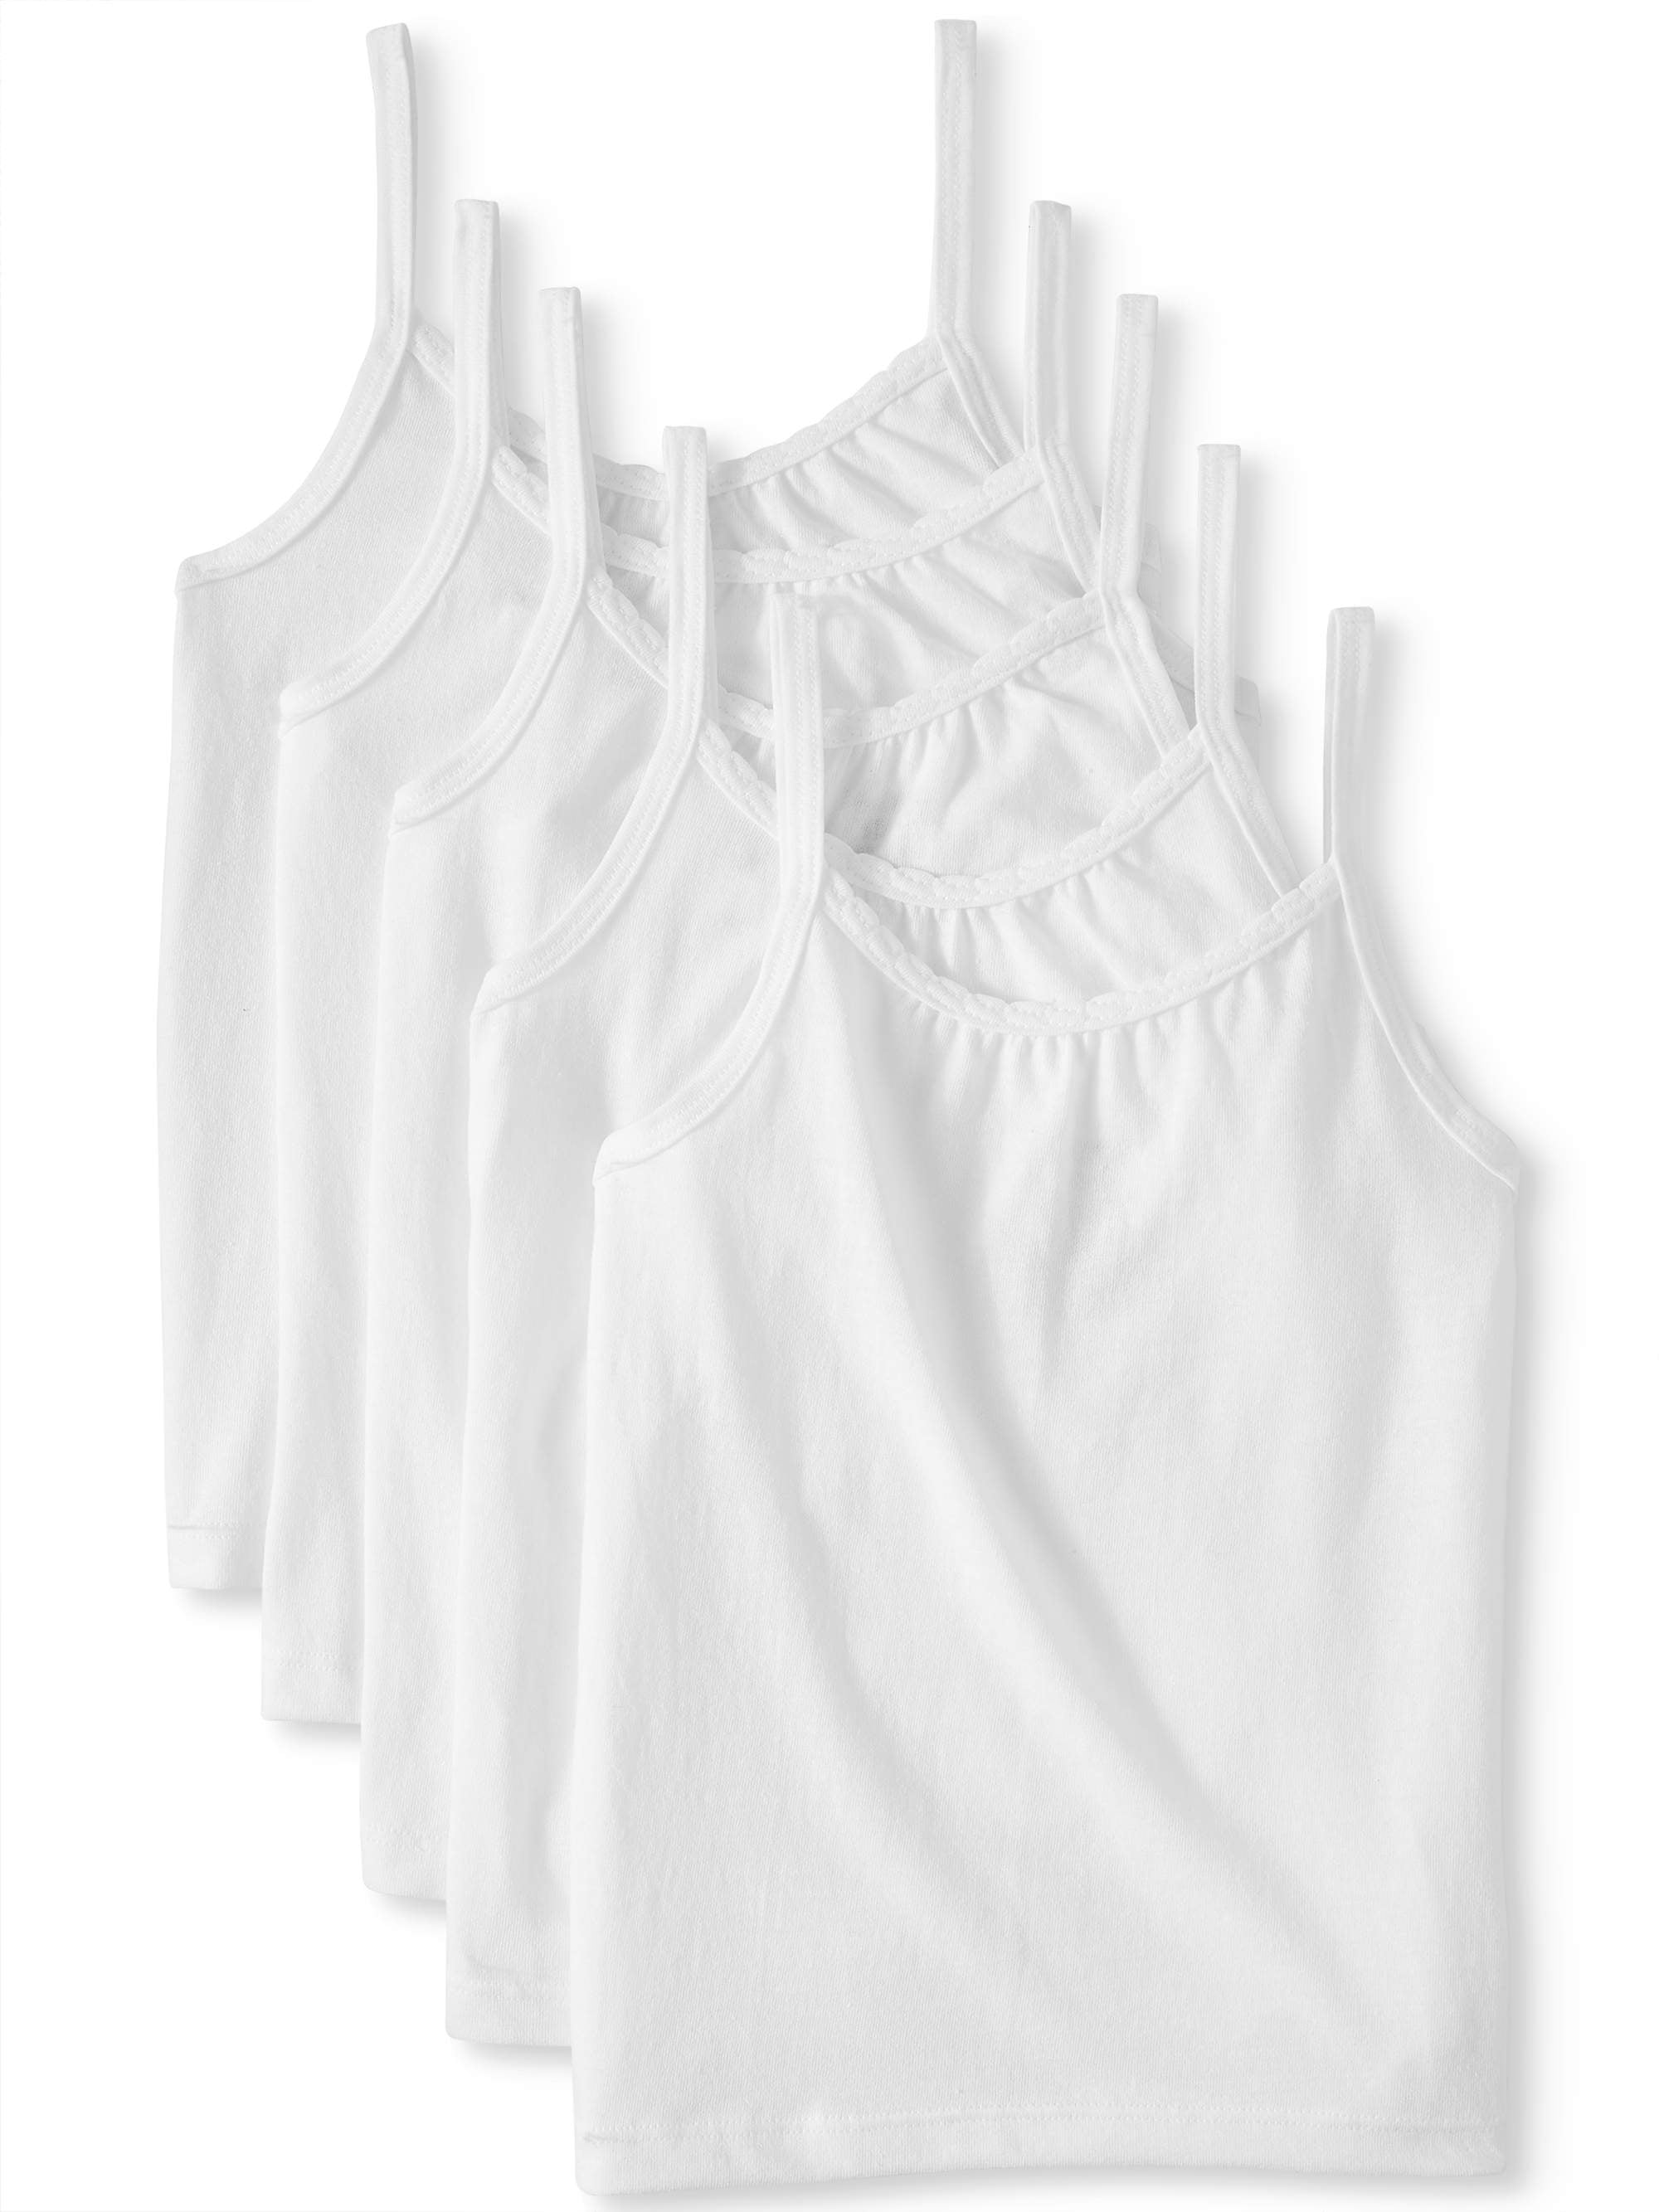 Hanes Toddler Girls TAGLESS Cotton Camisole 3-Pack 